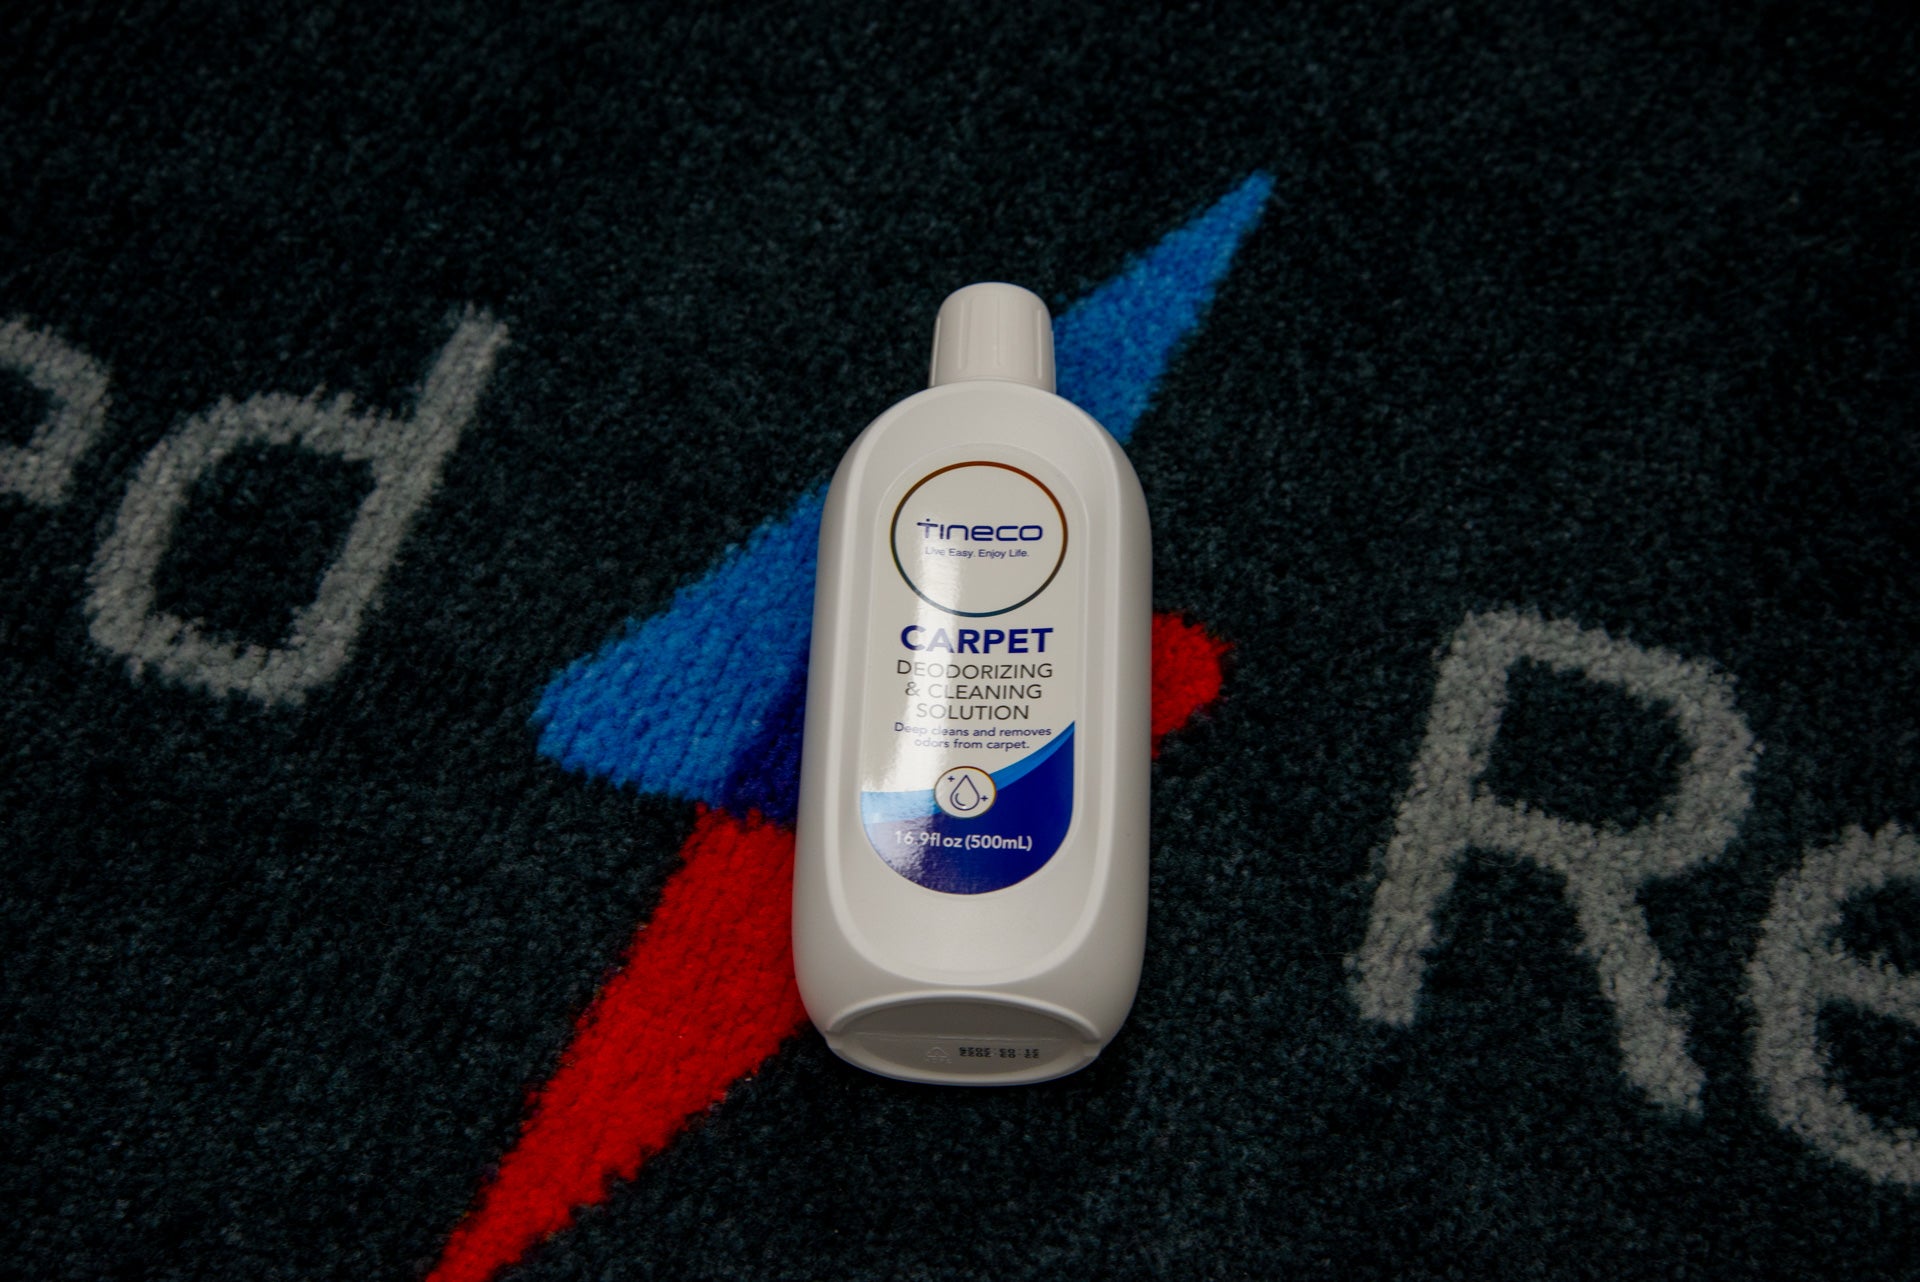 Tineco's branded cleaning solution